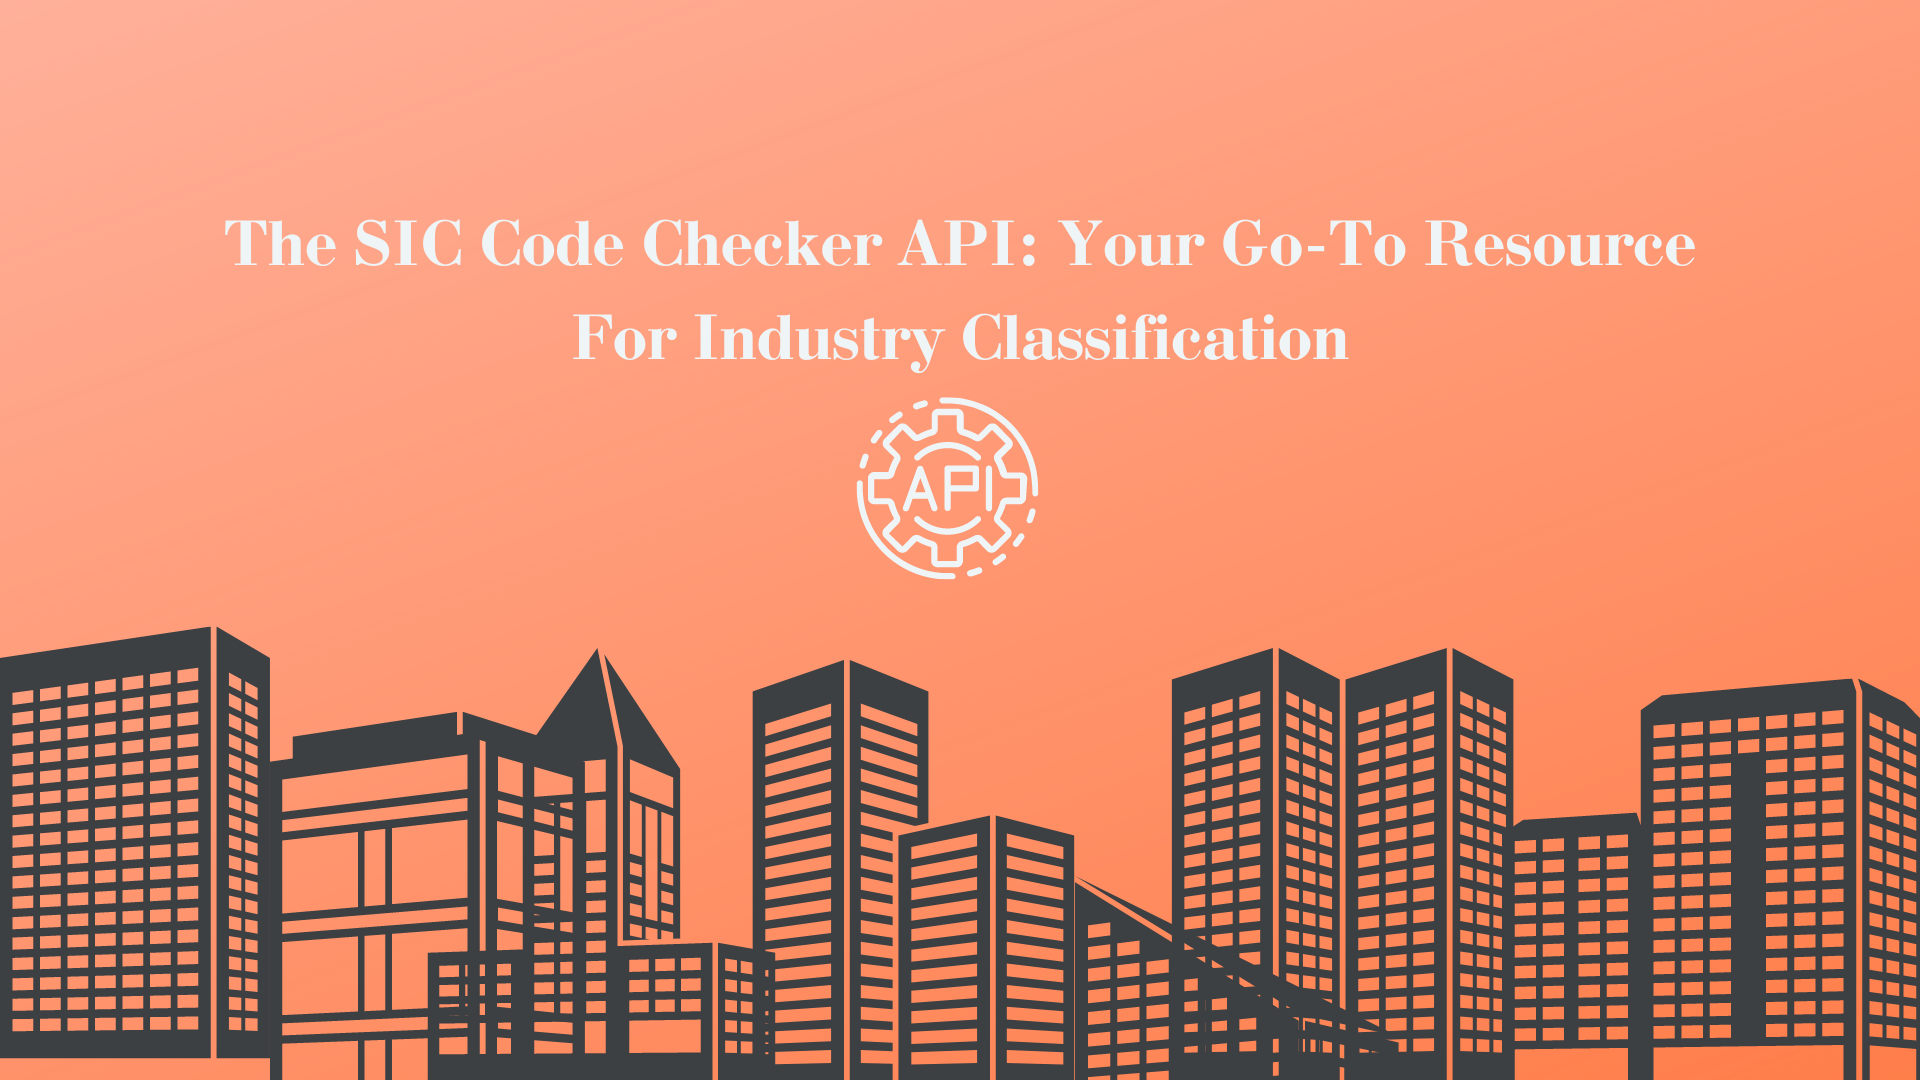 The SIC Code Checker API: Your Go-To Resource For Industry Classification